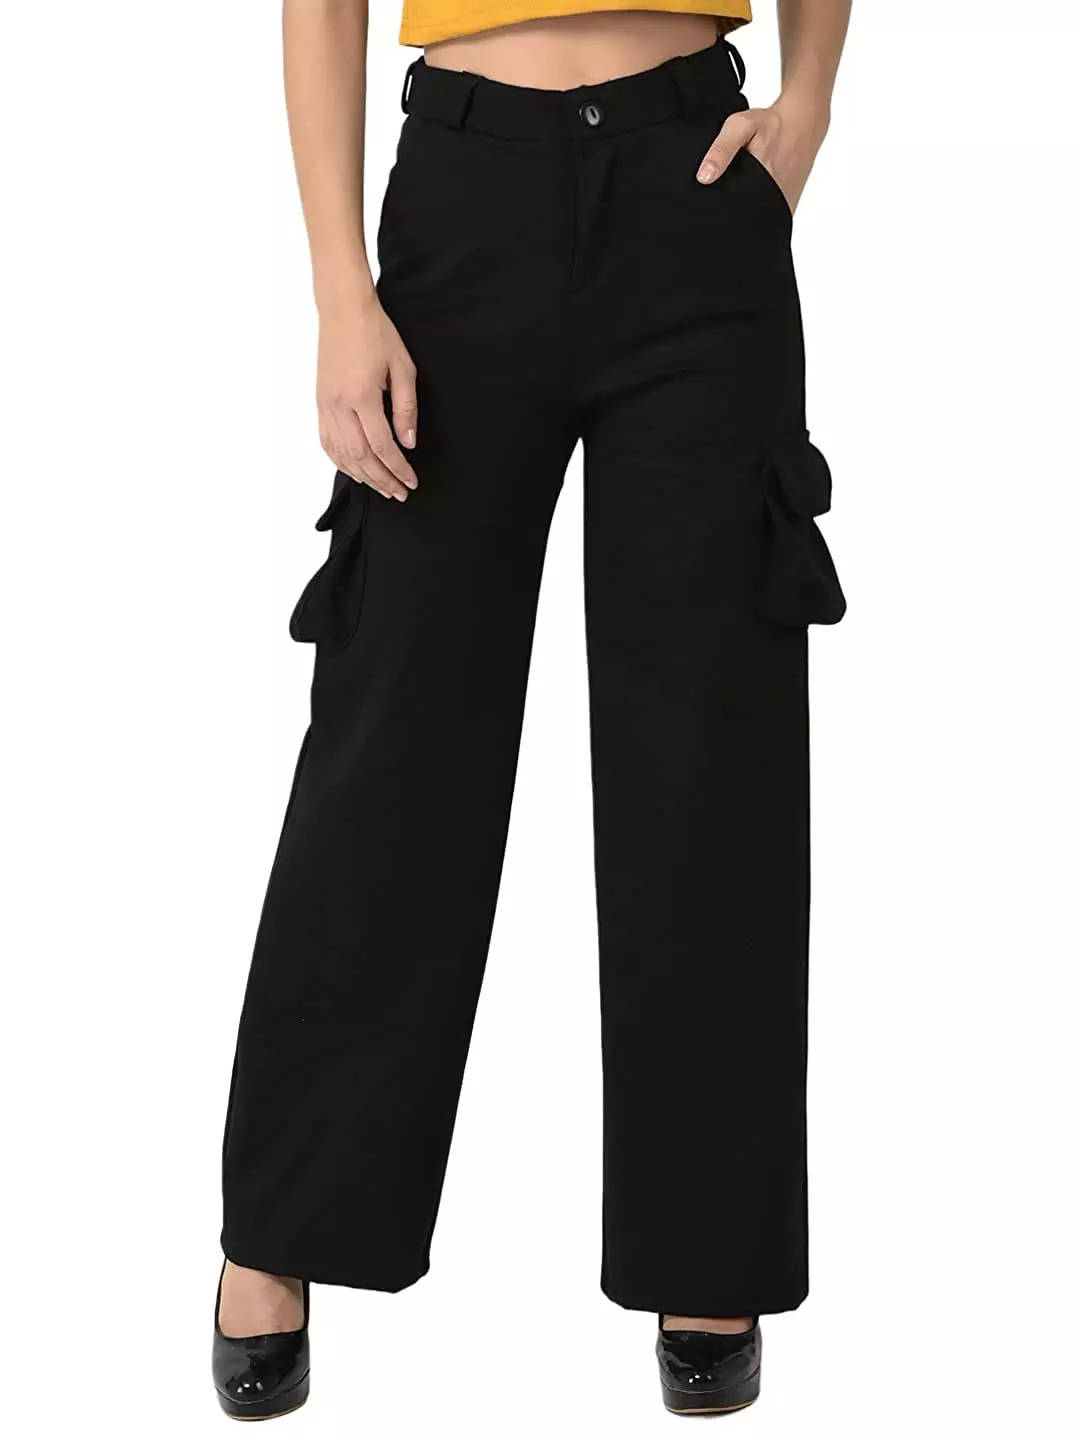 Stylish Cargo Pant For Women  Girls Trousers  Pants